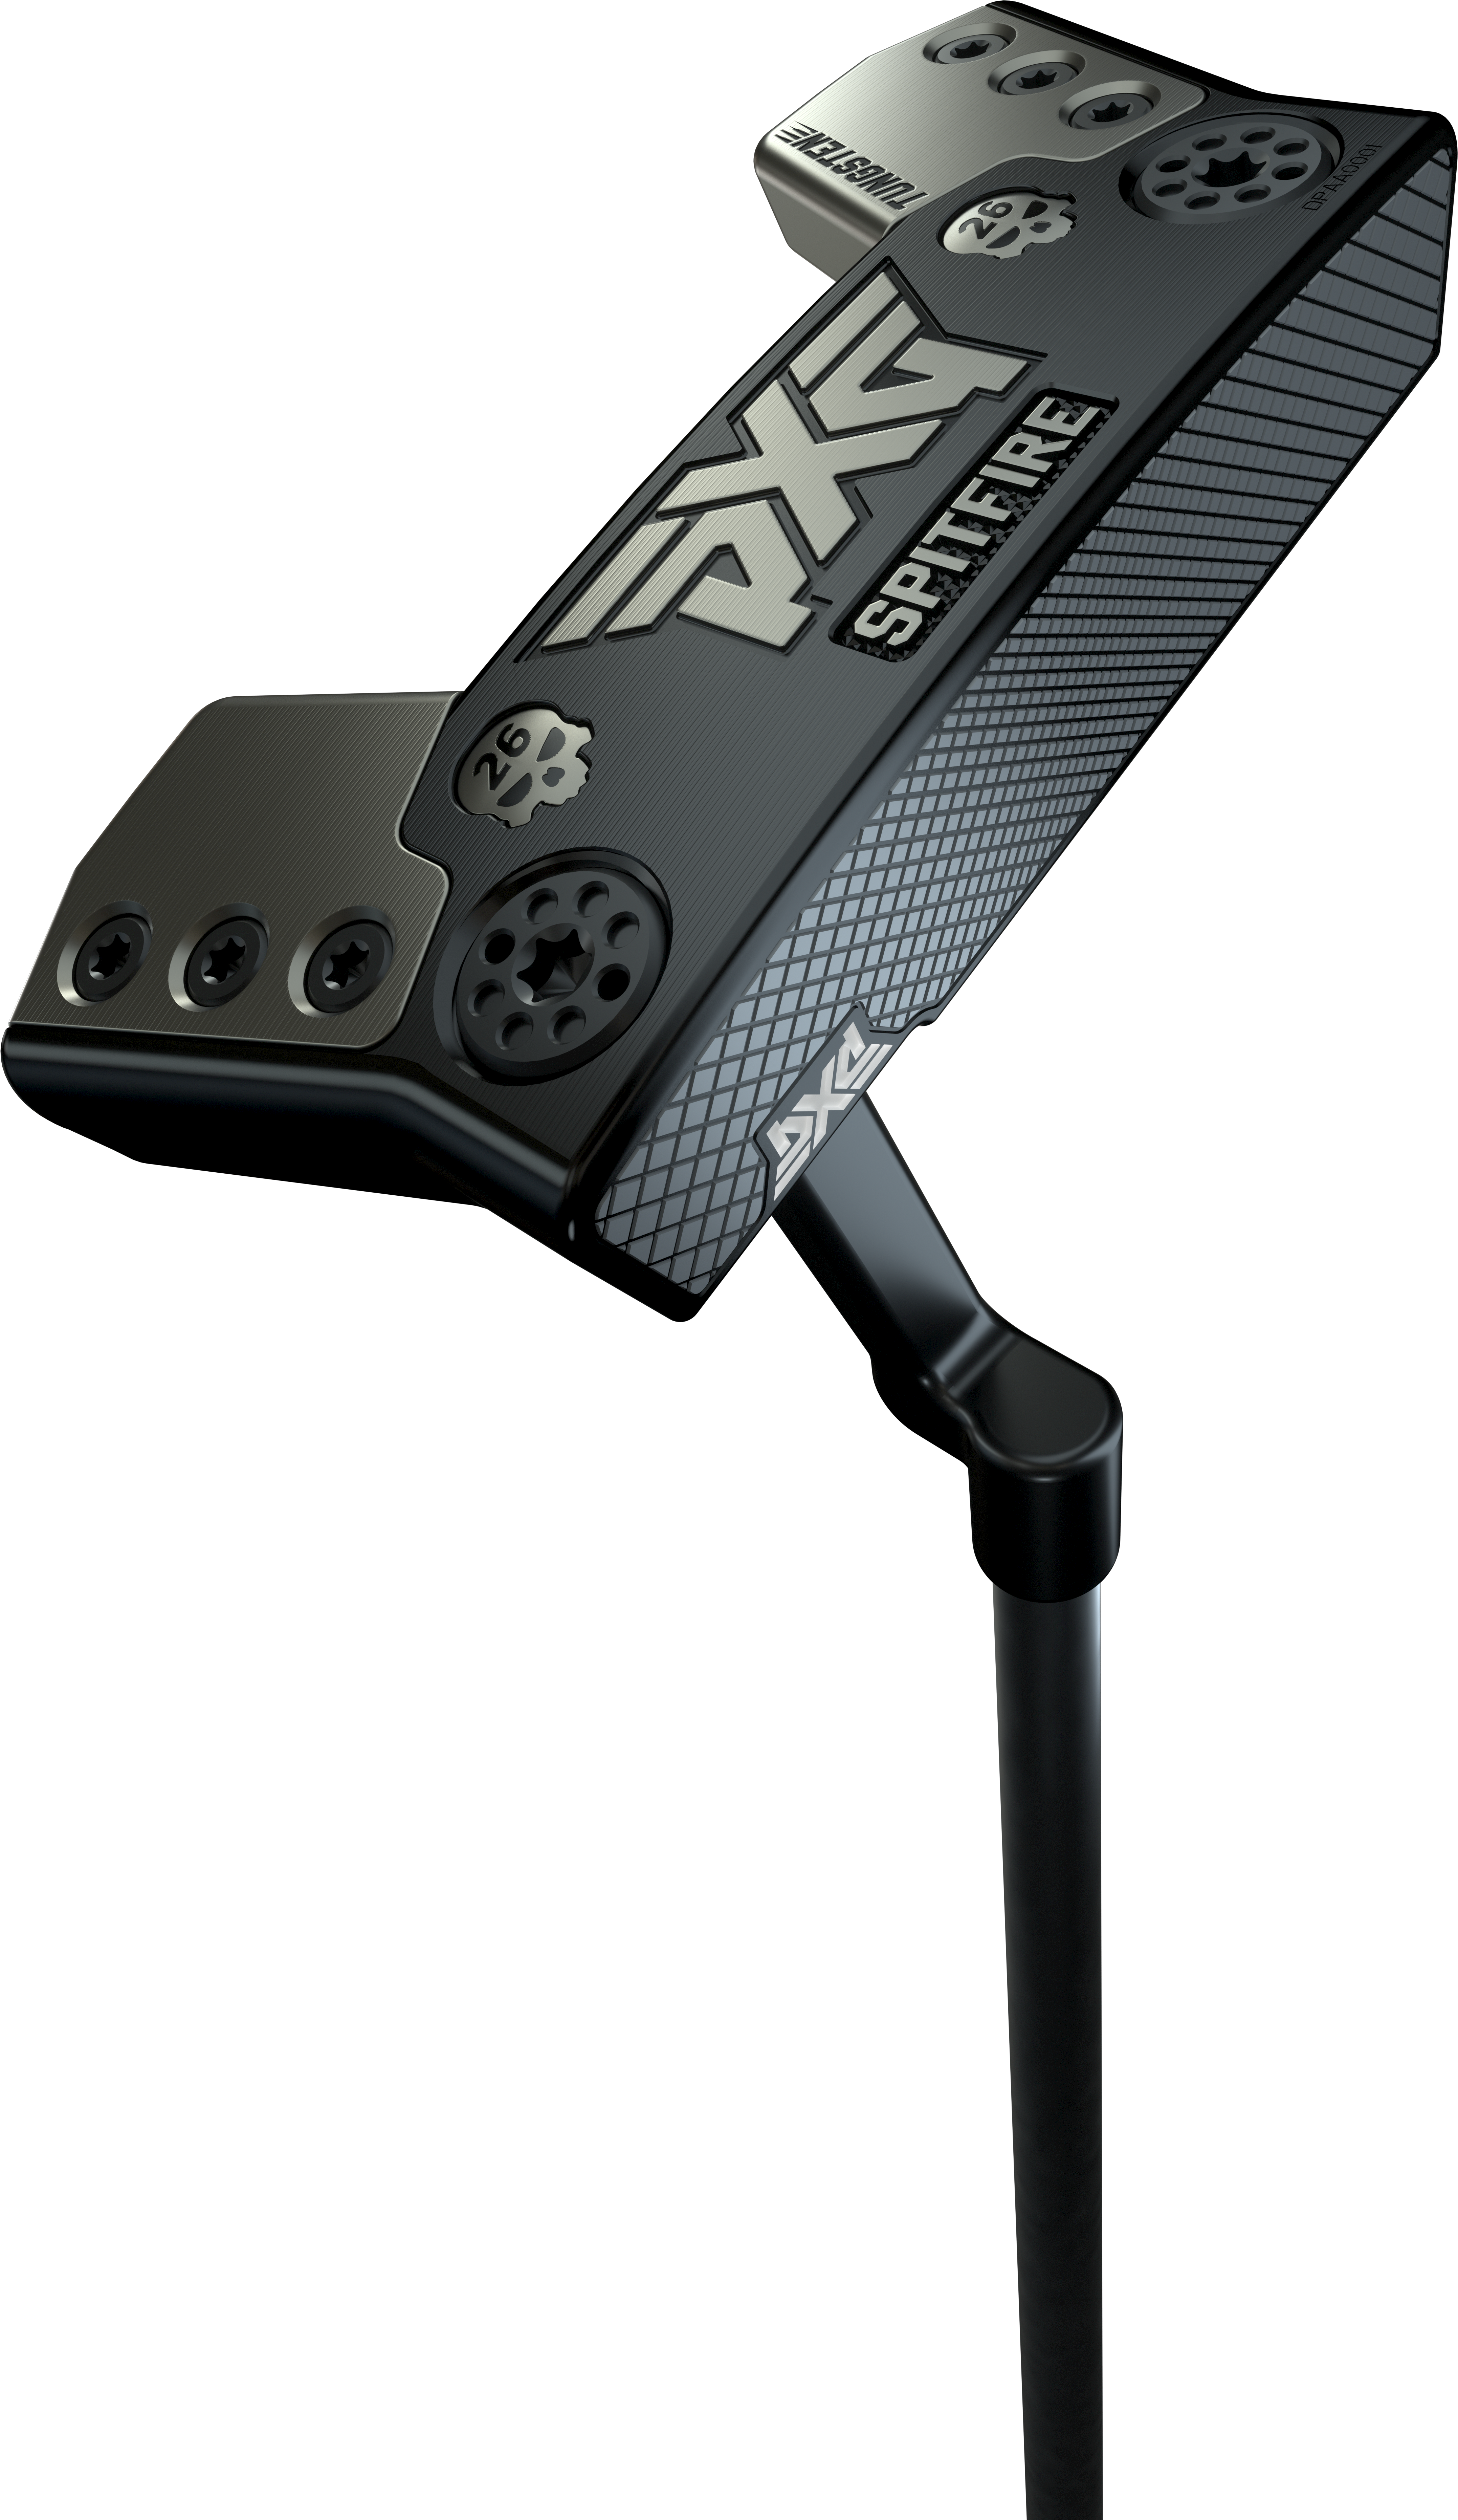 PXG adds to its Battle Ready line of putters with two new blade